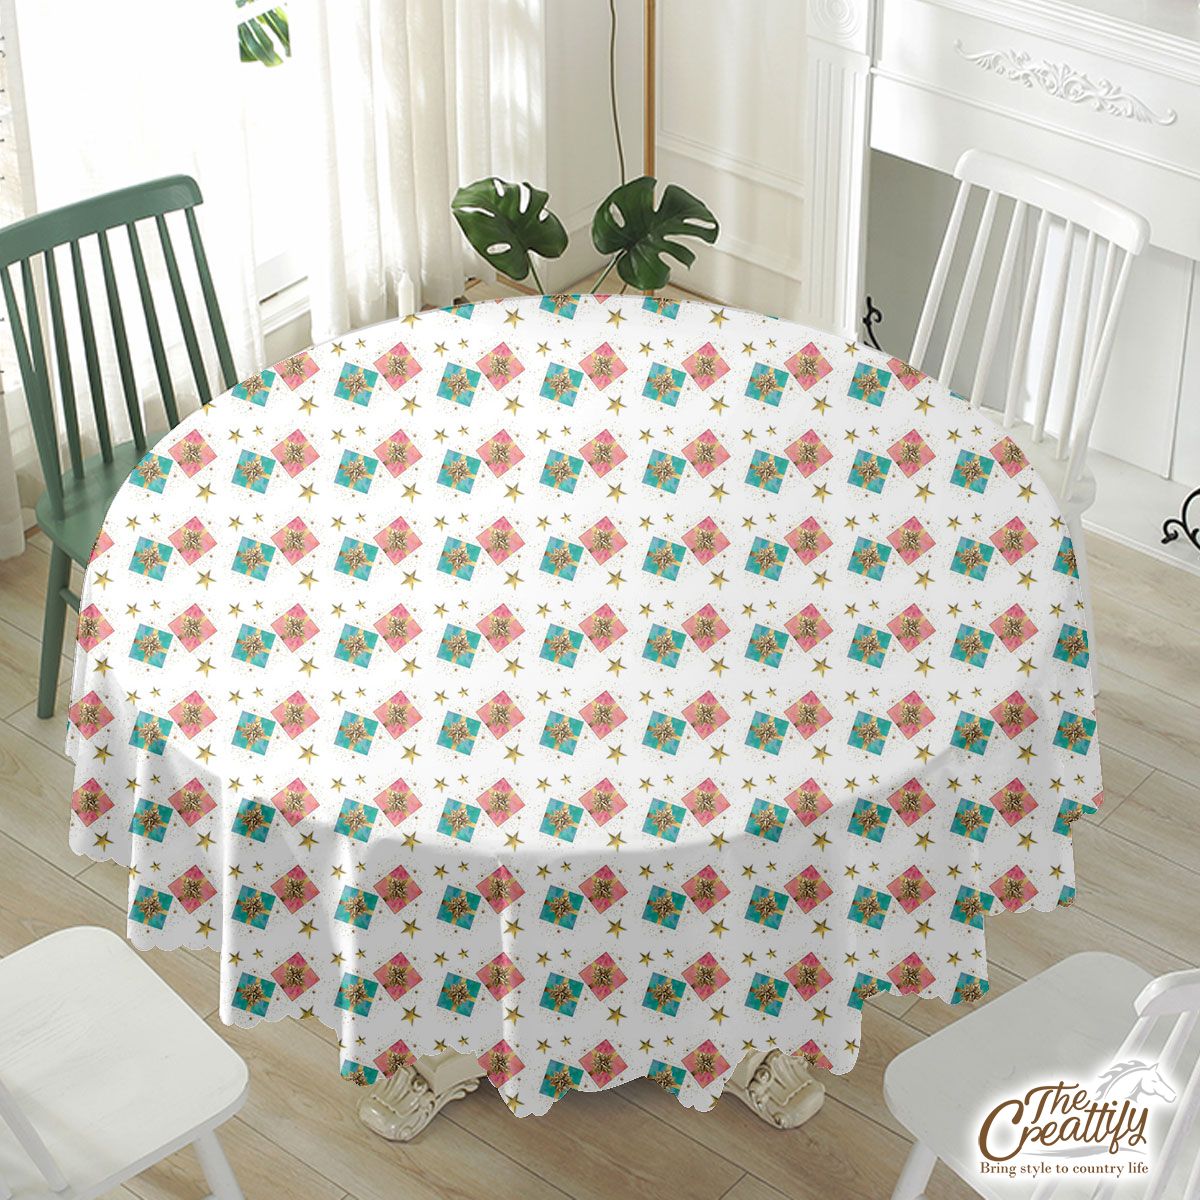 Christmas Gifts, Christmas Present Ideas, Christmas Pattern Waterproof Tablecloth